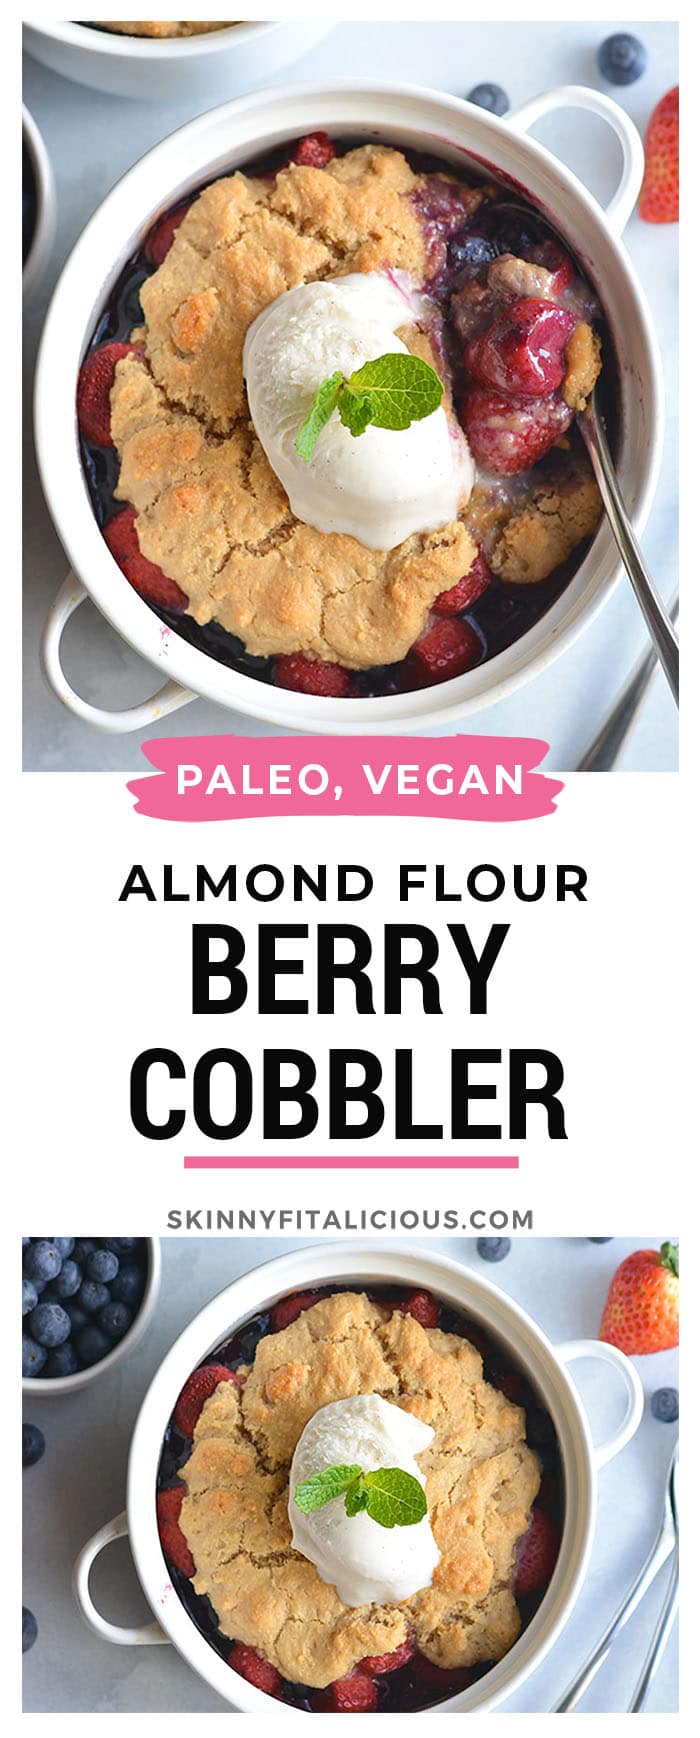 Paleo Berry Cobbler! An irresistible dessert with a delicious almond flour topping! Dairy free, Vegan friendly, easy to make and customize too!